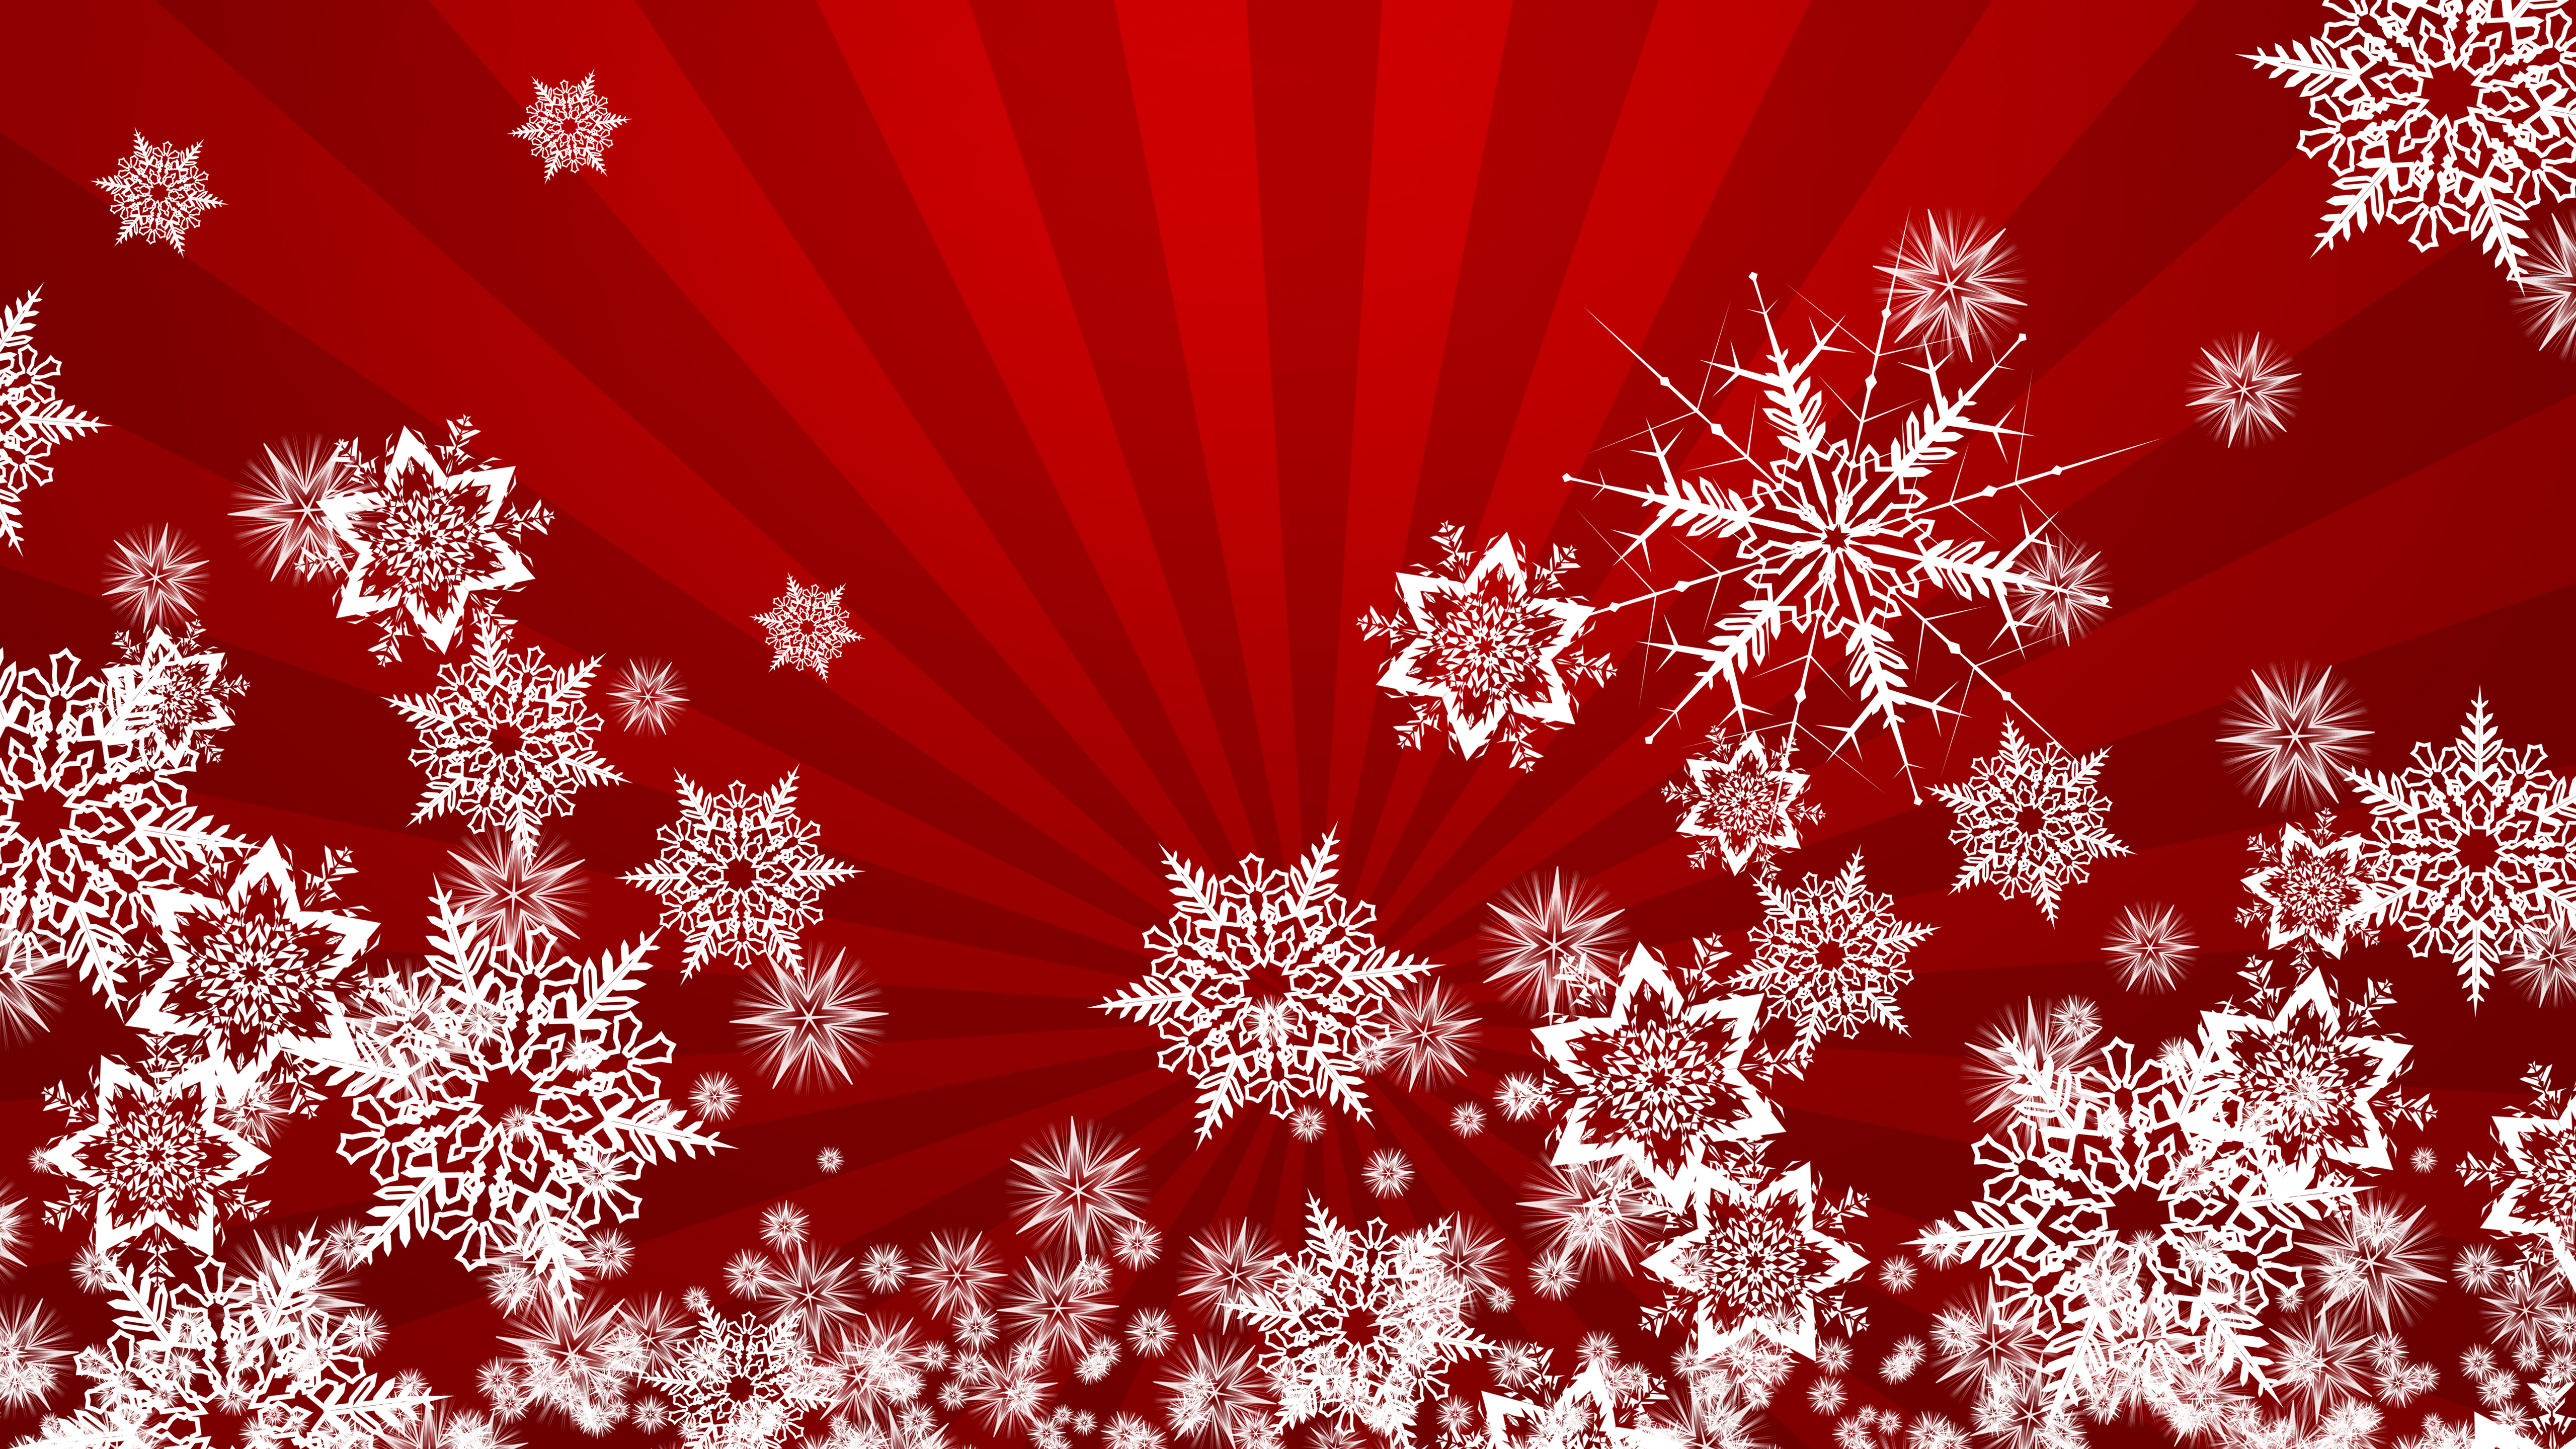 Abstract Snowflakes Digital Art Stripes Red Vector 5120x2880